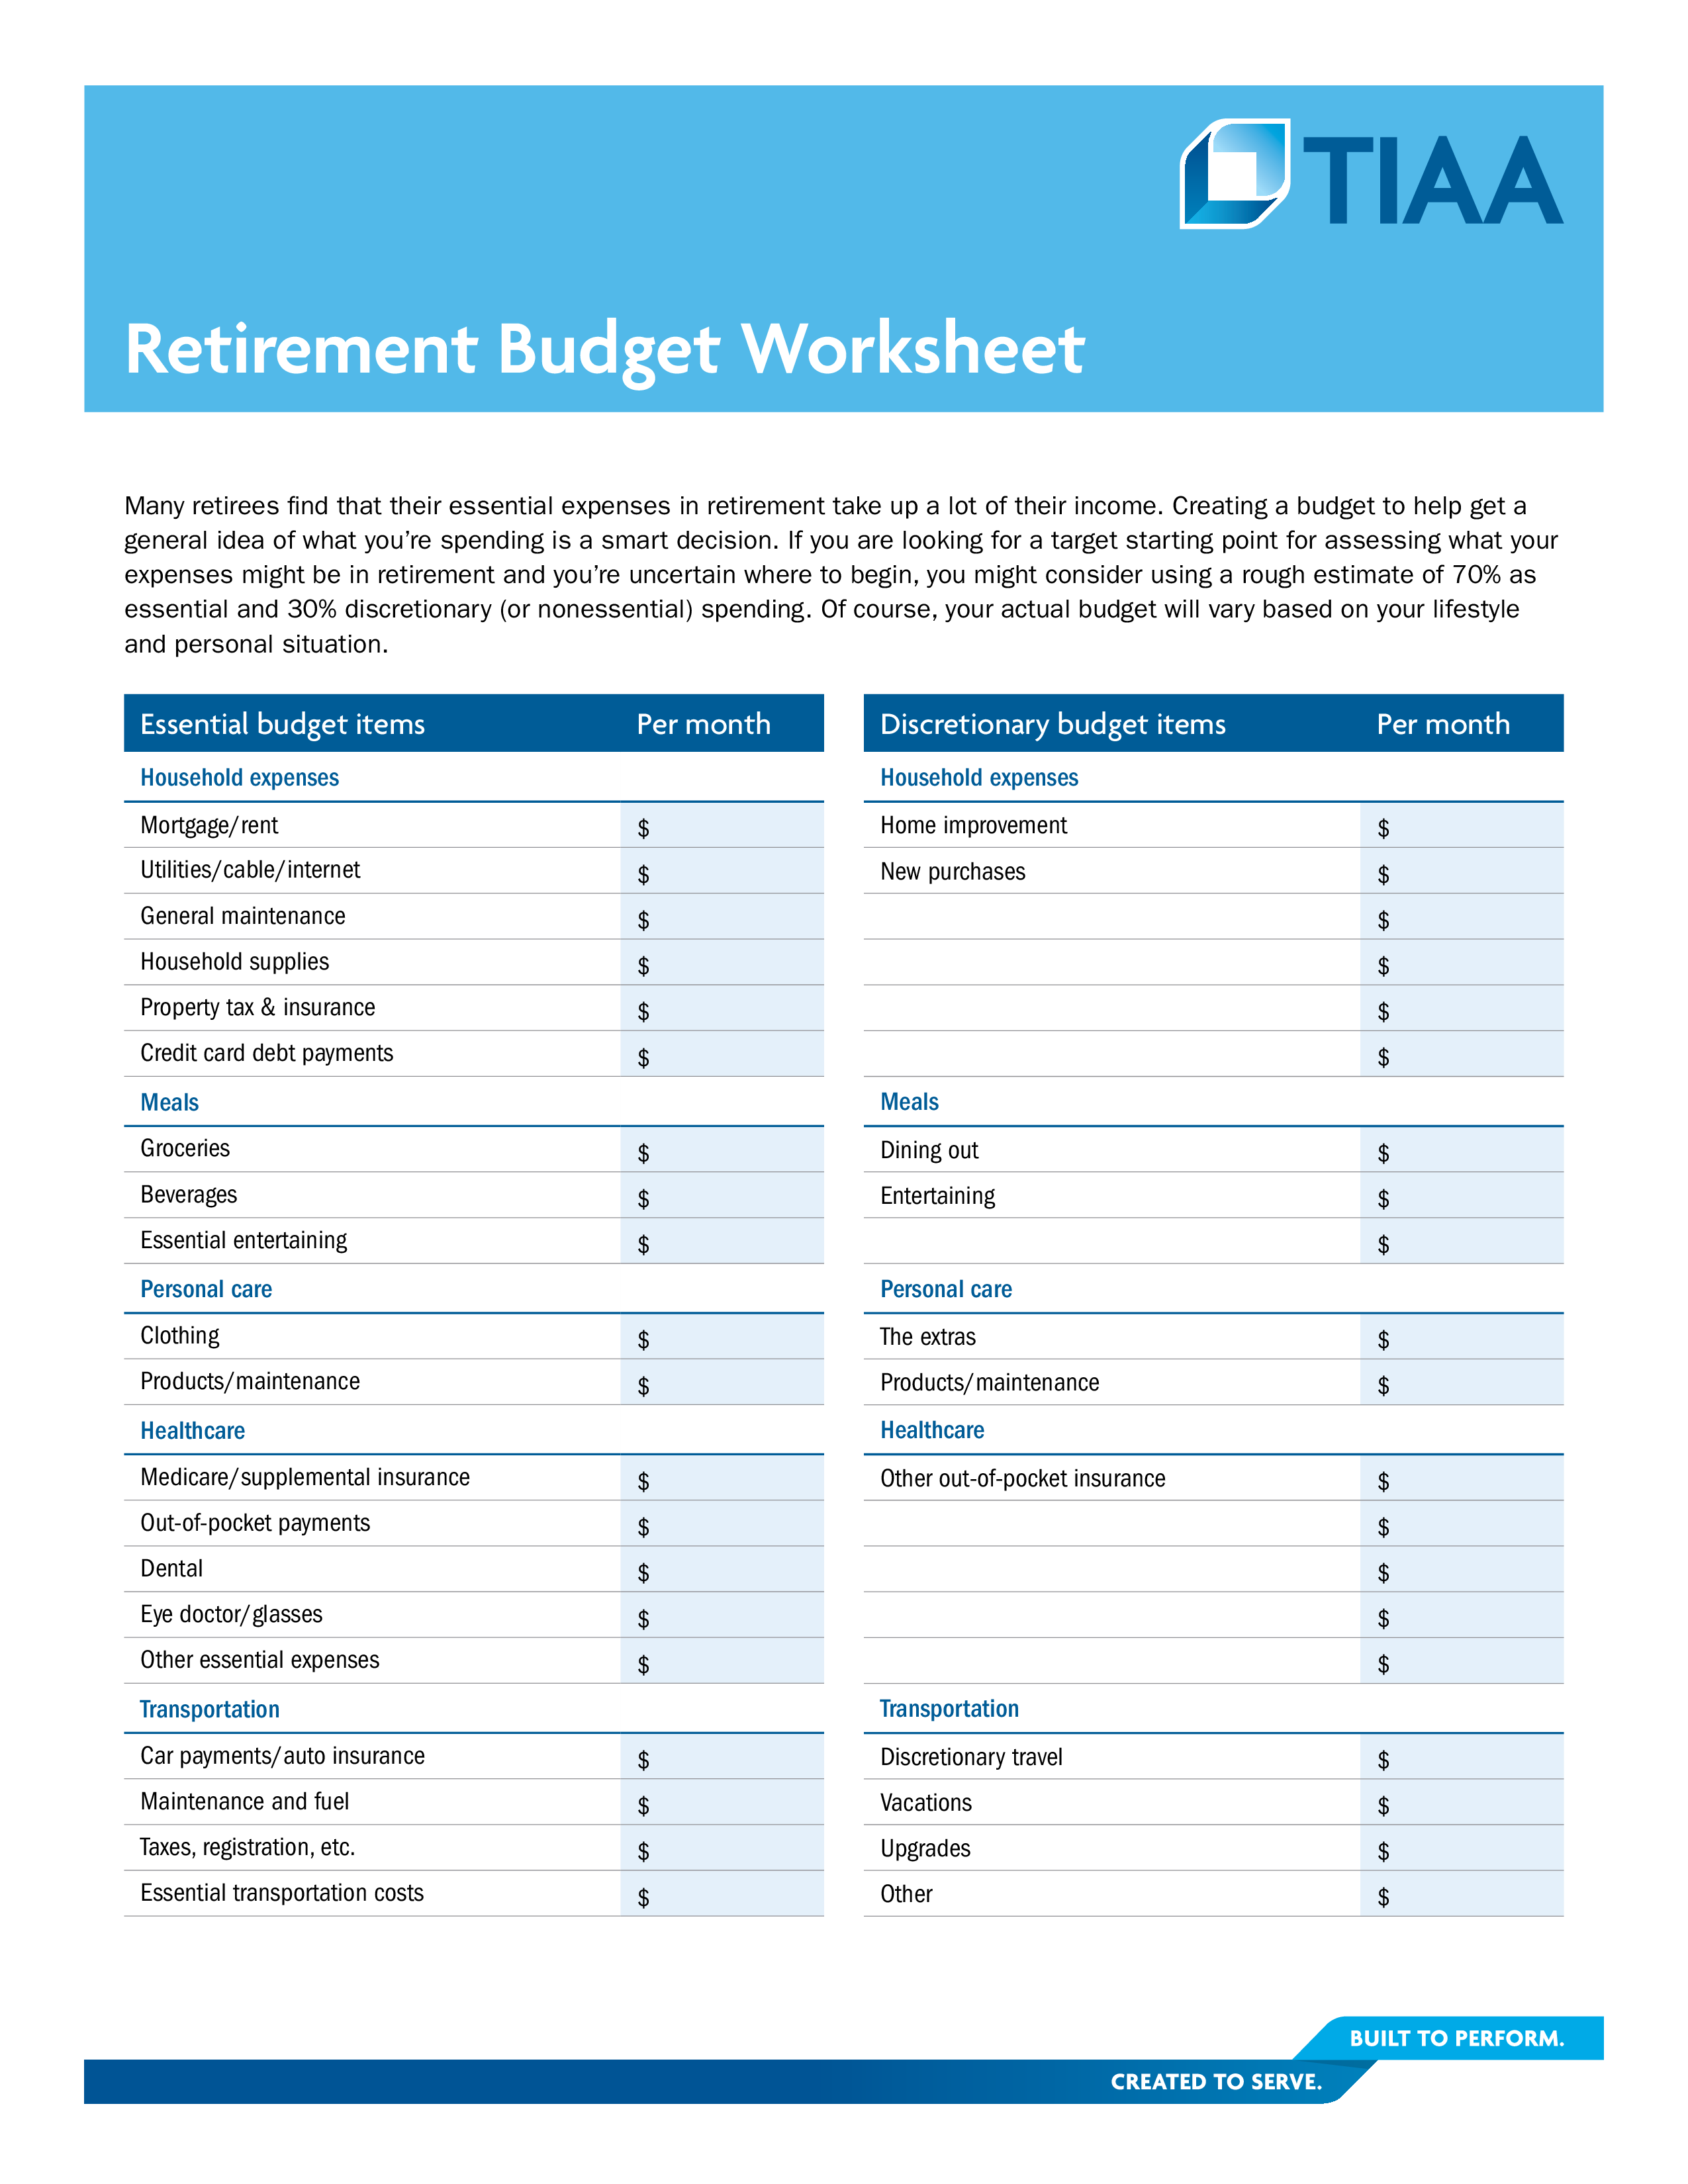 monthly budget planning worksheet for retirement at 65